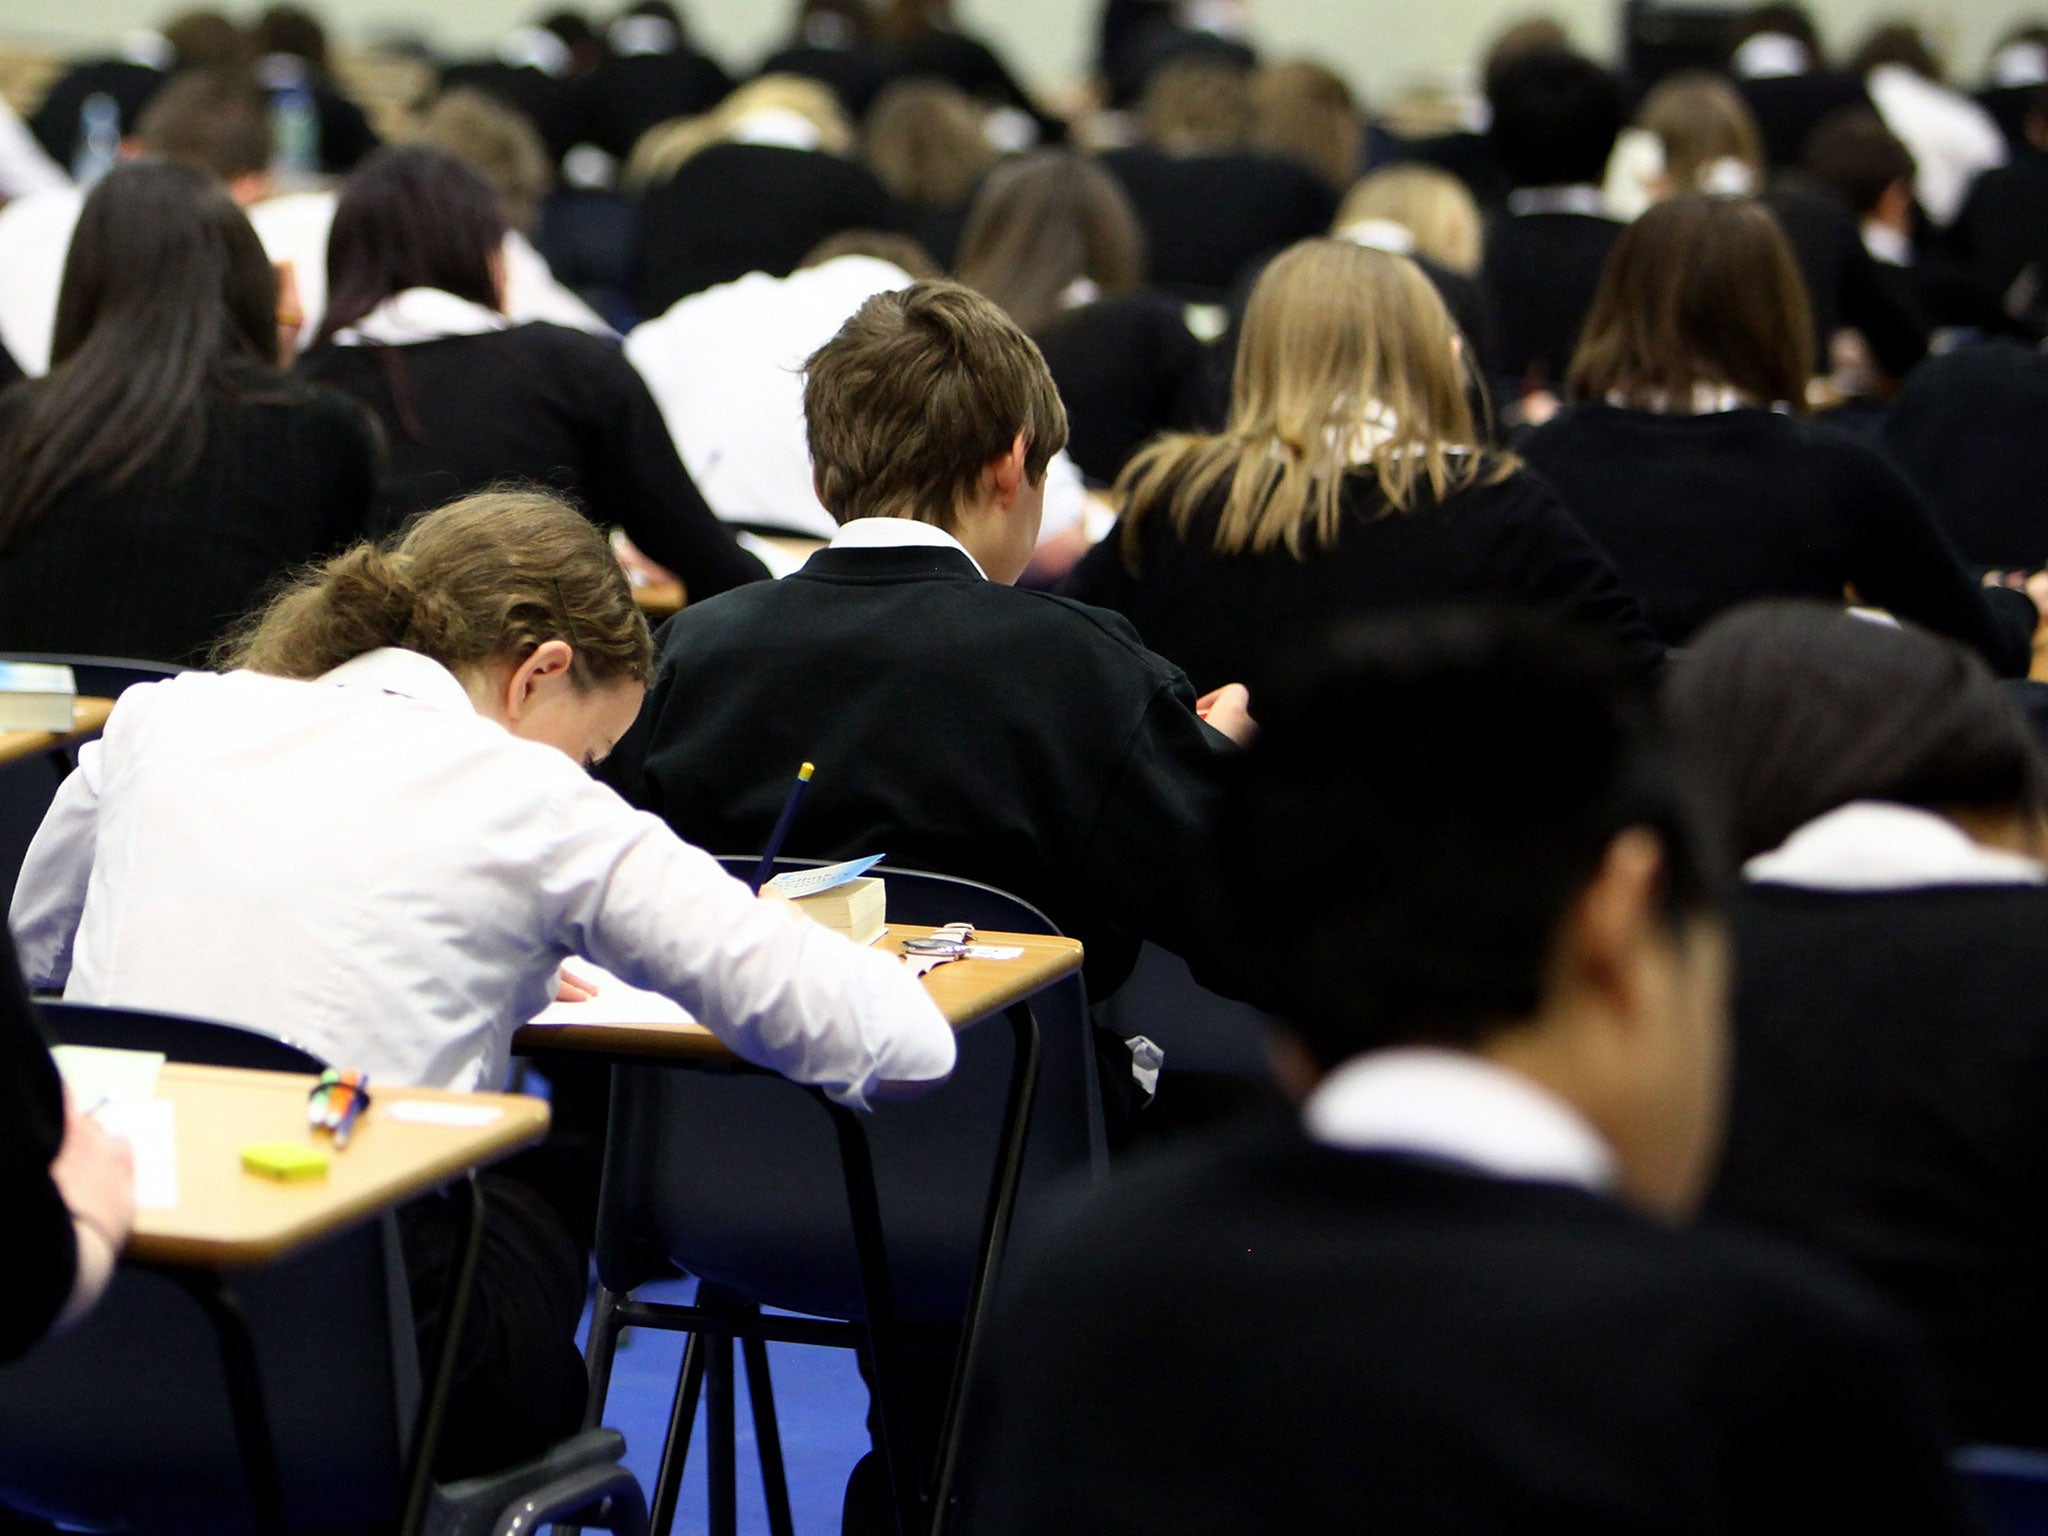 Working-class pupils are just as likely to get a degree after attending a comprehensive school as a grammar school